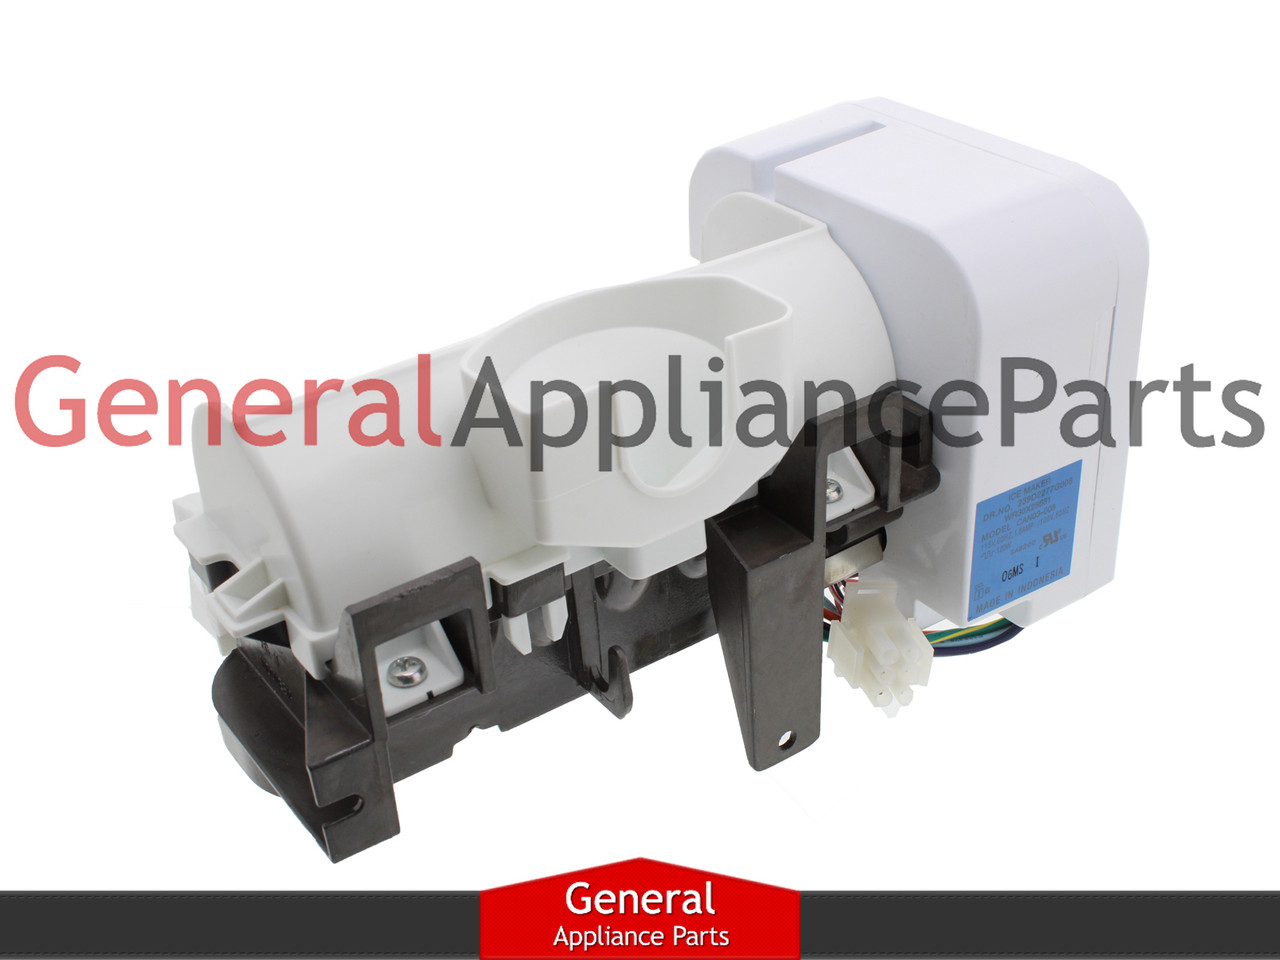 OEM Refrigerator Ice Maker replaces GE General Electric # AP6872751  PS12710403 - General Appliance Parts